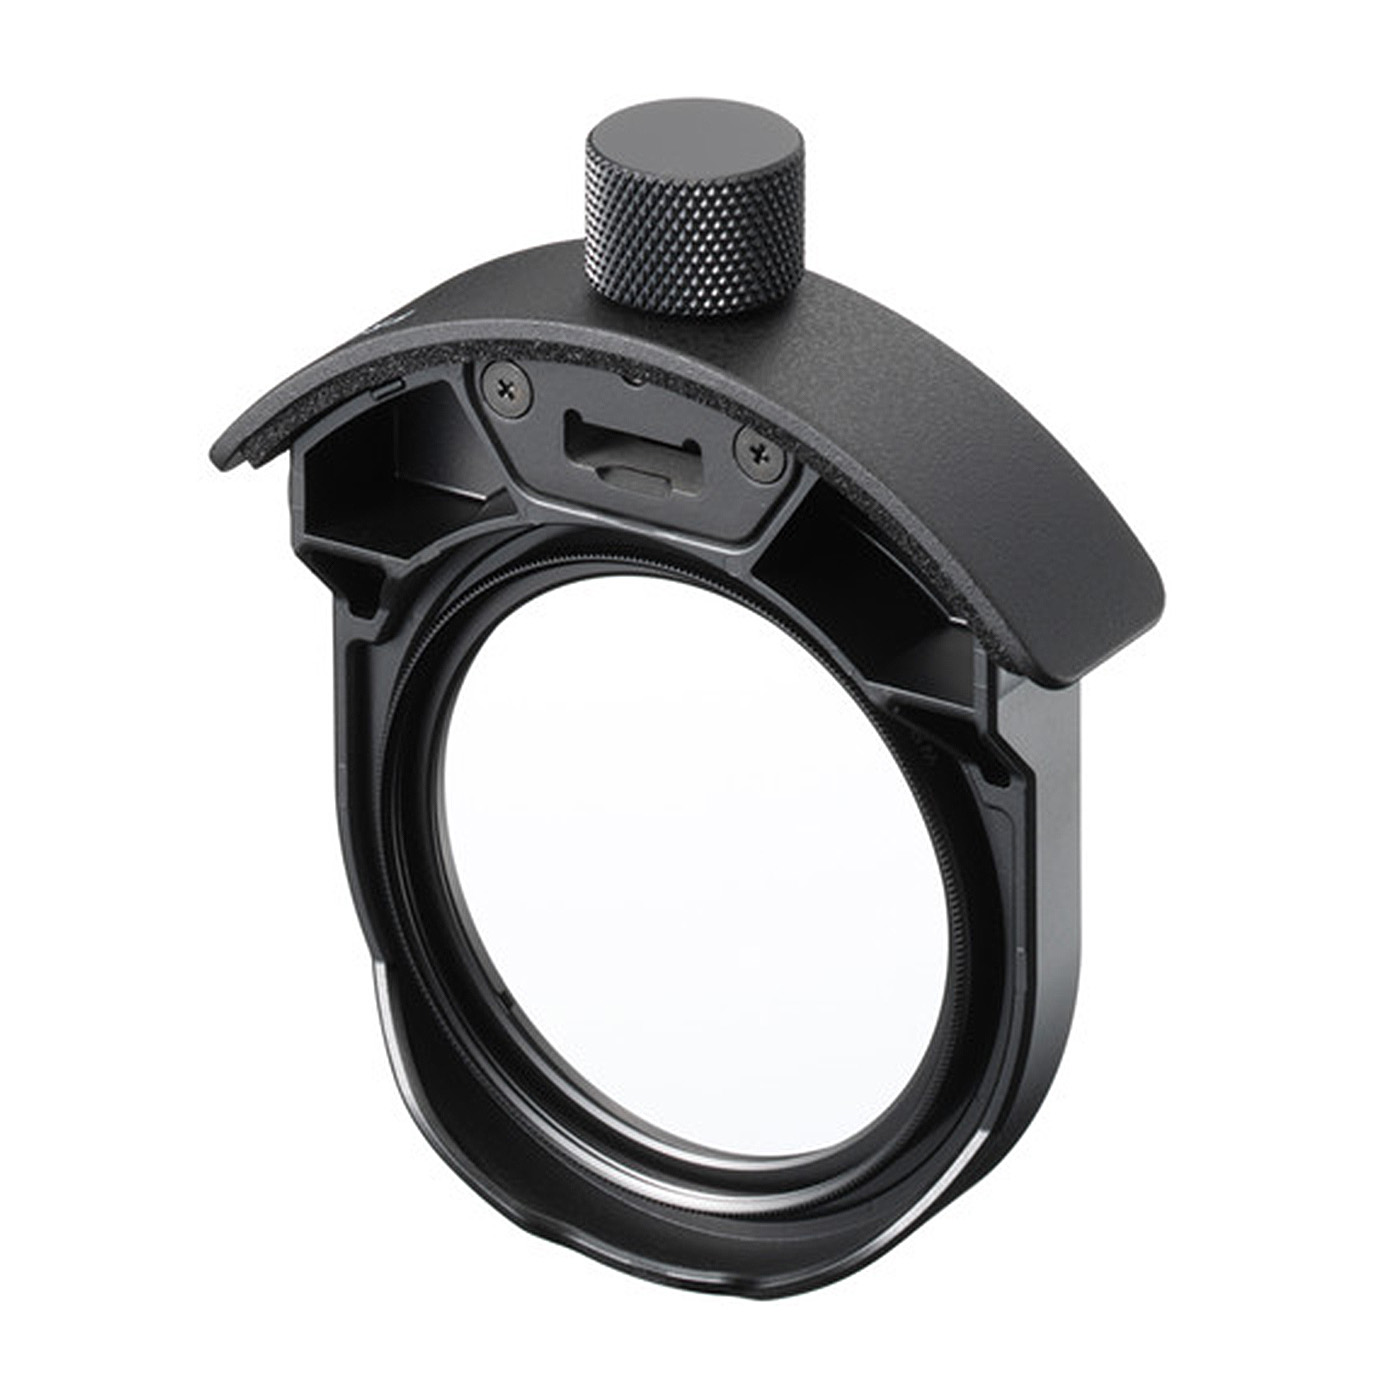 Filter Holder for 500mm F4 DG OS HSM | Sports with 46mm Protection Filter